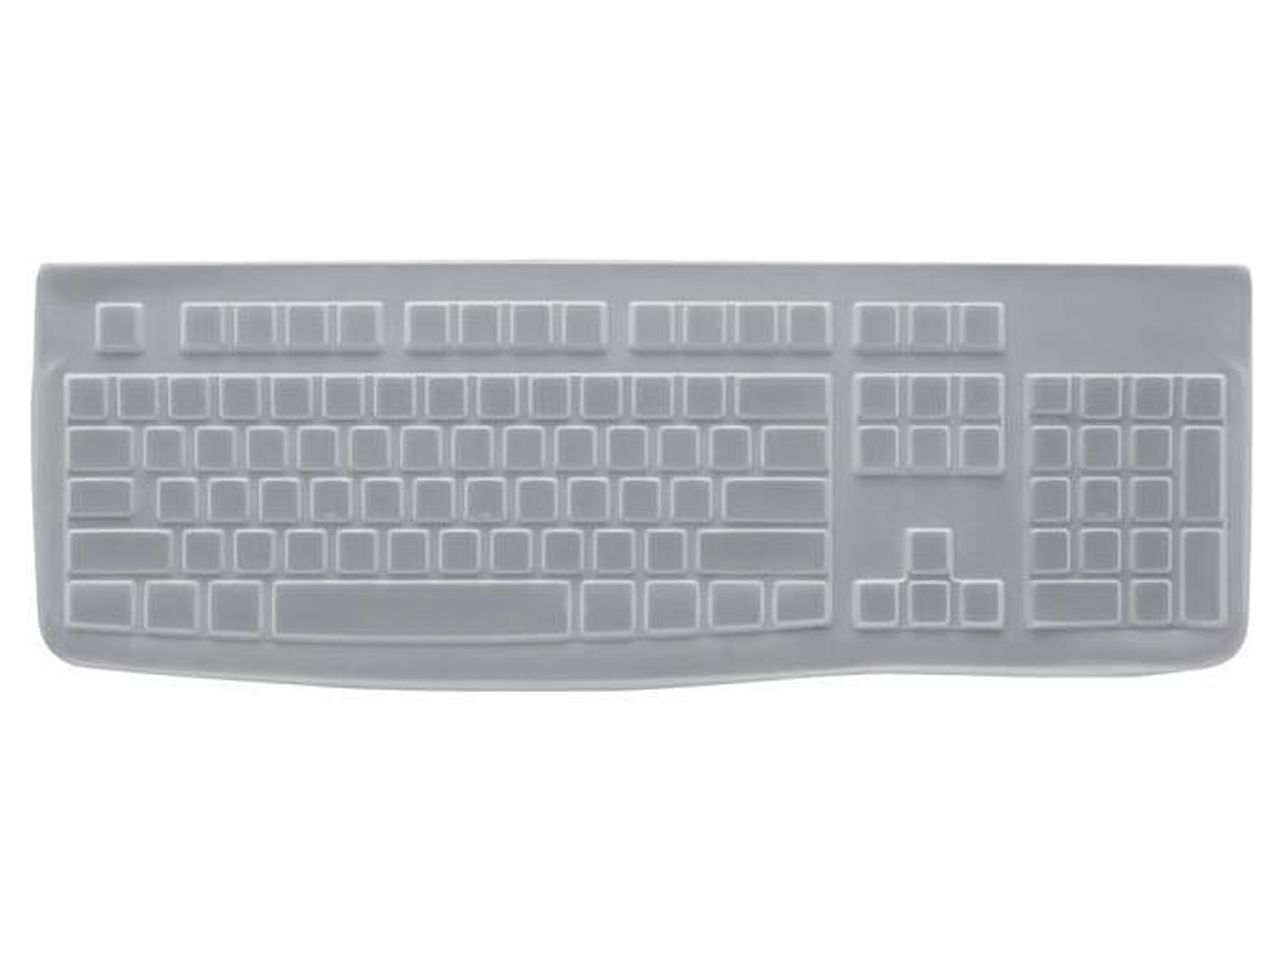 Logitech Protective Covers for K120 Keyboard - Silicone - image 1 of 5